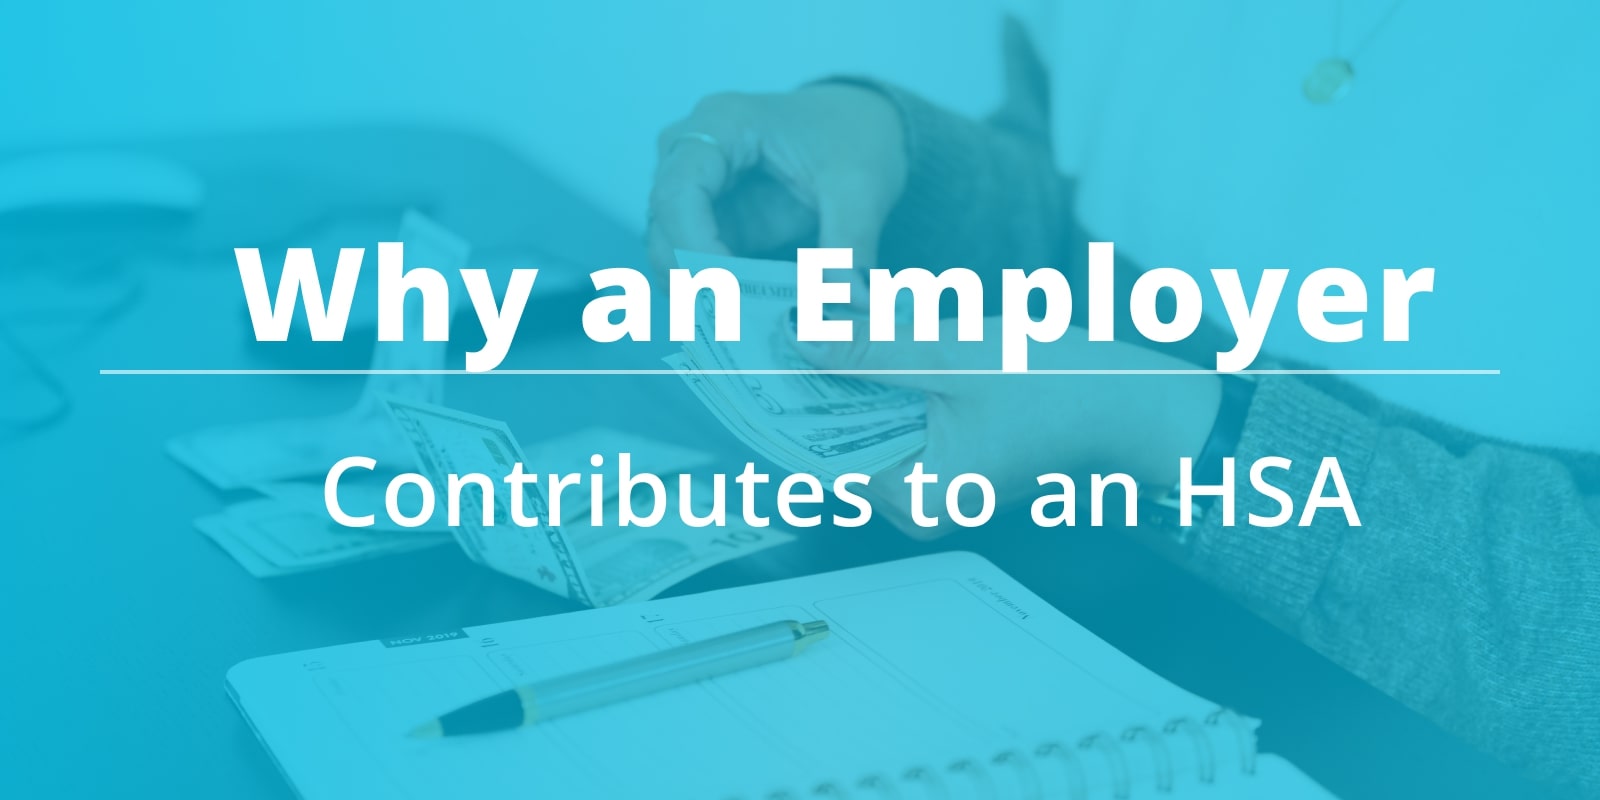 Why Should an Employer Contribute to an HSA?